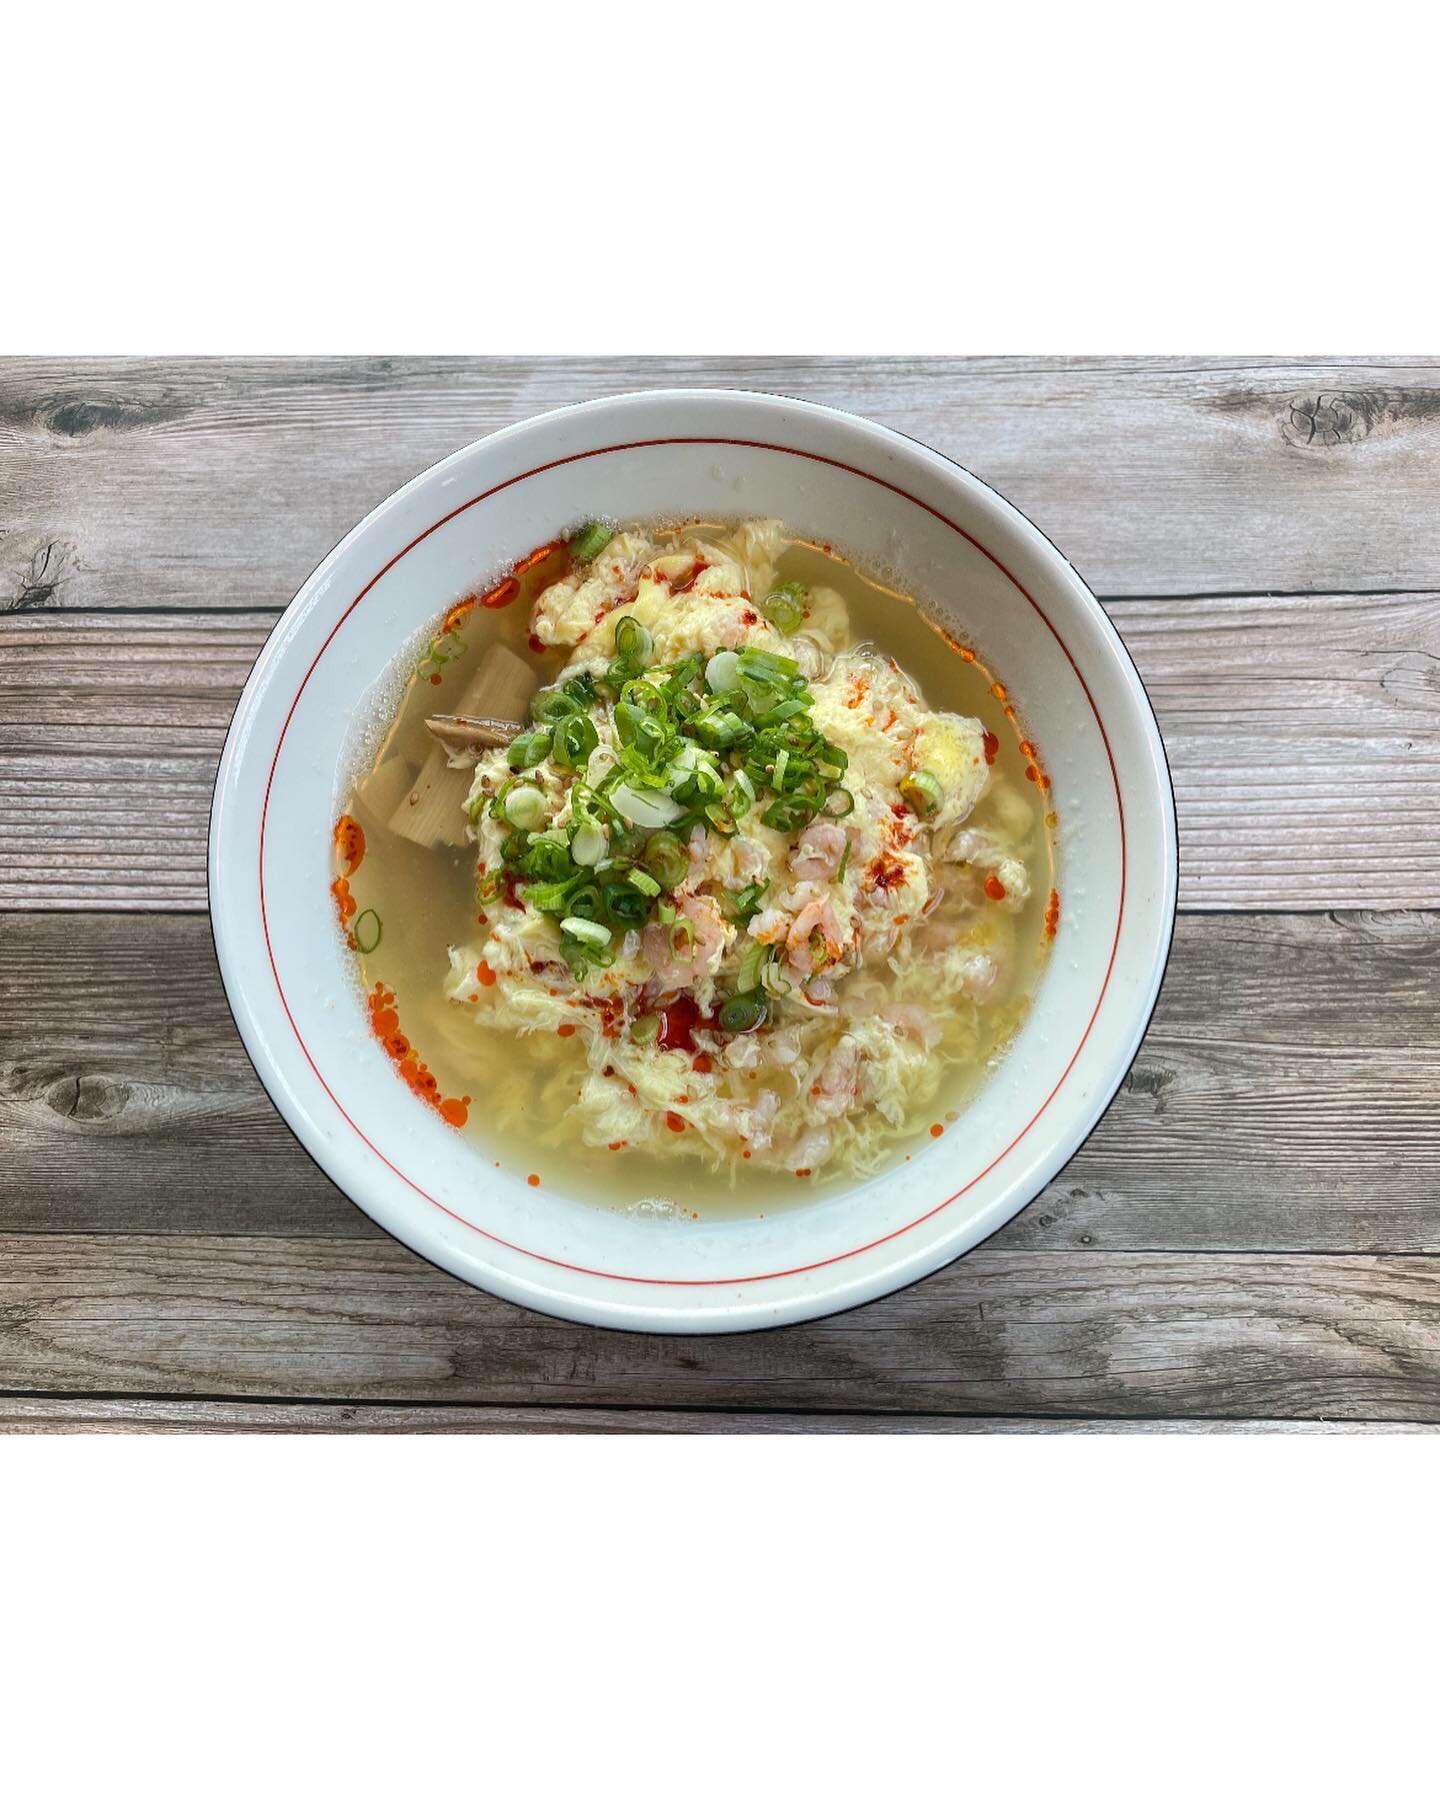 🥢 New Ramen Egg Drop!!
Introducing our new ramen Egg Drop Shrimp Ramen made with Bay Shrimp and served with our Umami Dashi Broth! Come in and try today 🍜